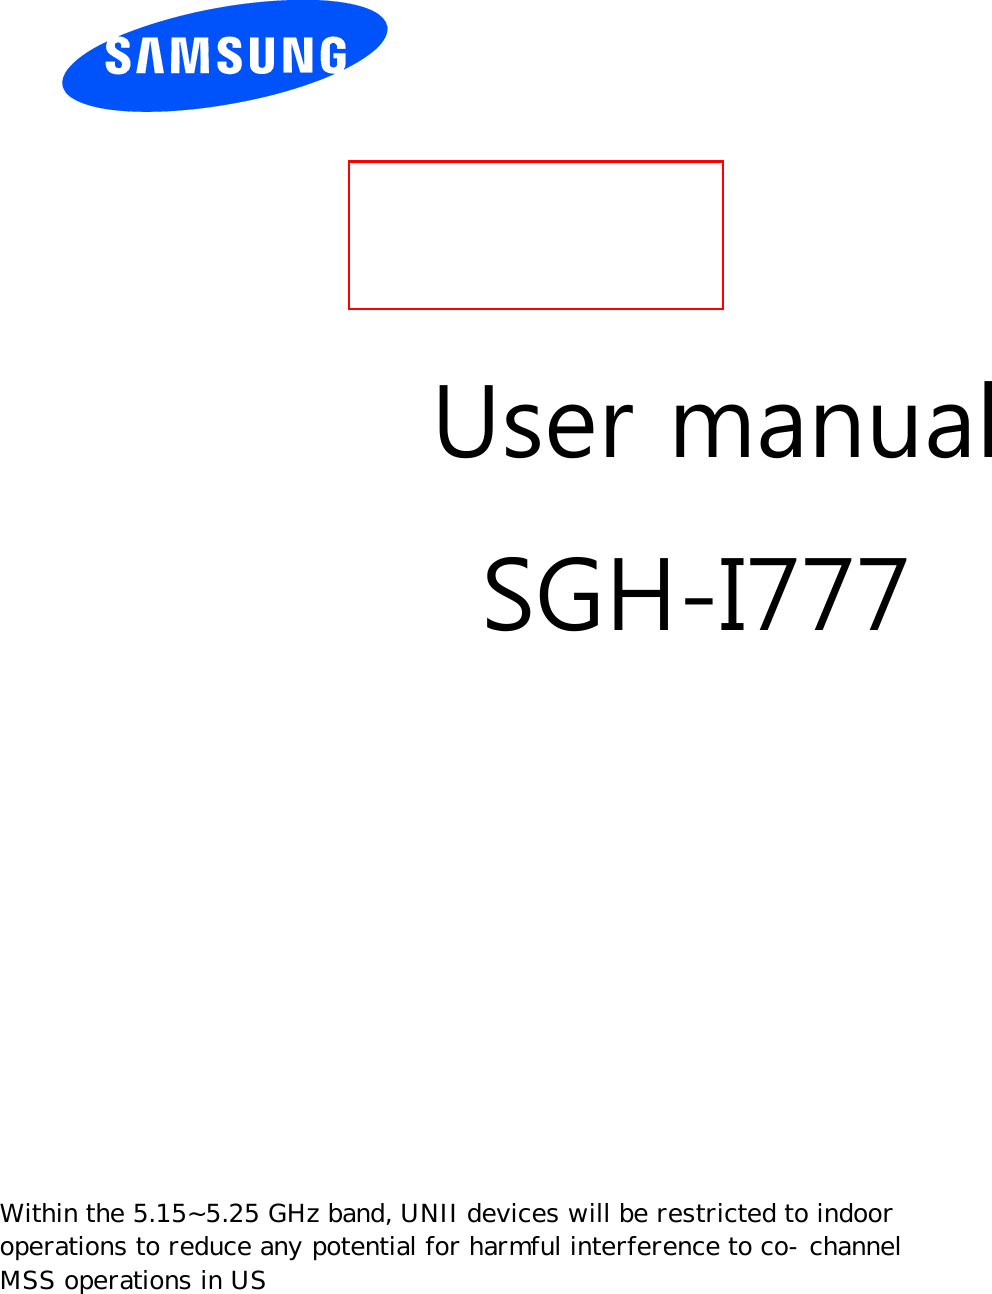          User manual SGH-I777                  Within the 5.15~5.25 GHz band, UNII devices will be restricted to indoor  operations to reduce any potential for harmful interference to co-channel   MSS operations in US 